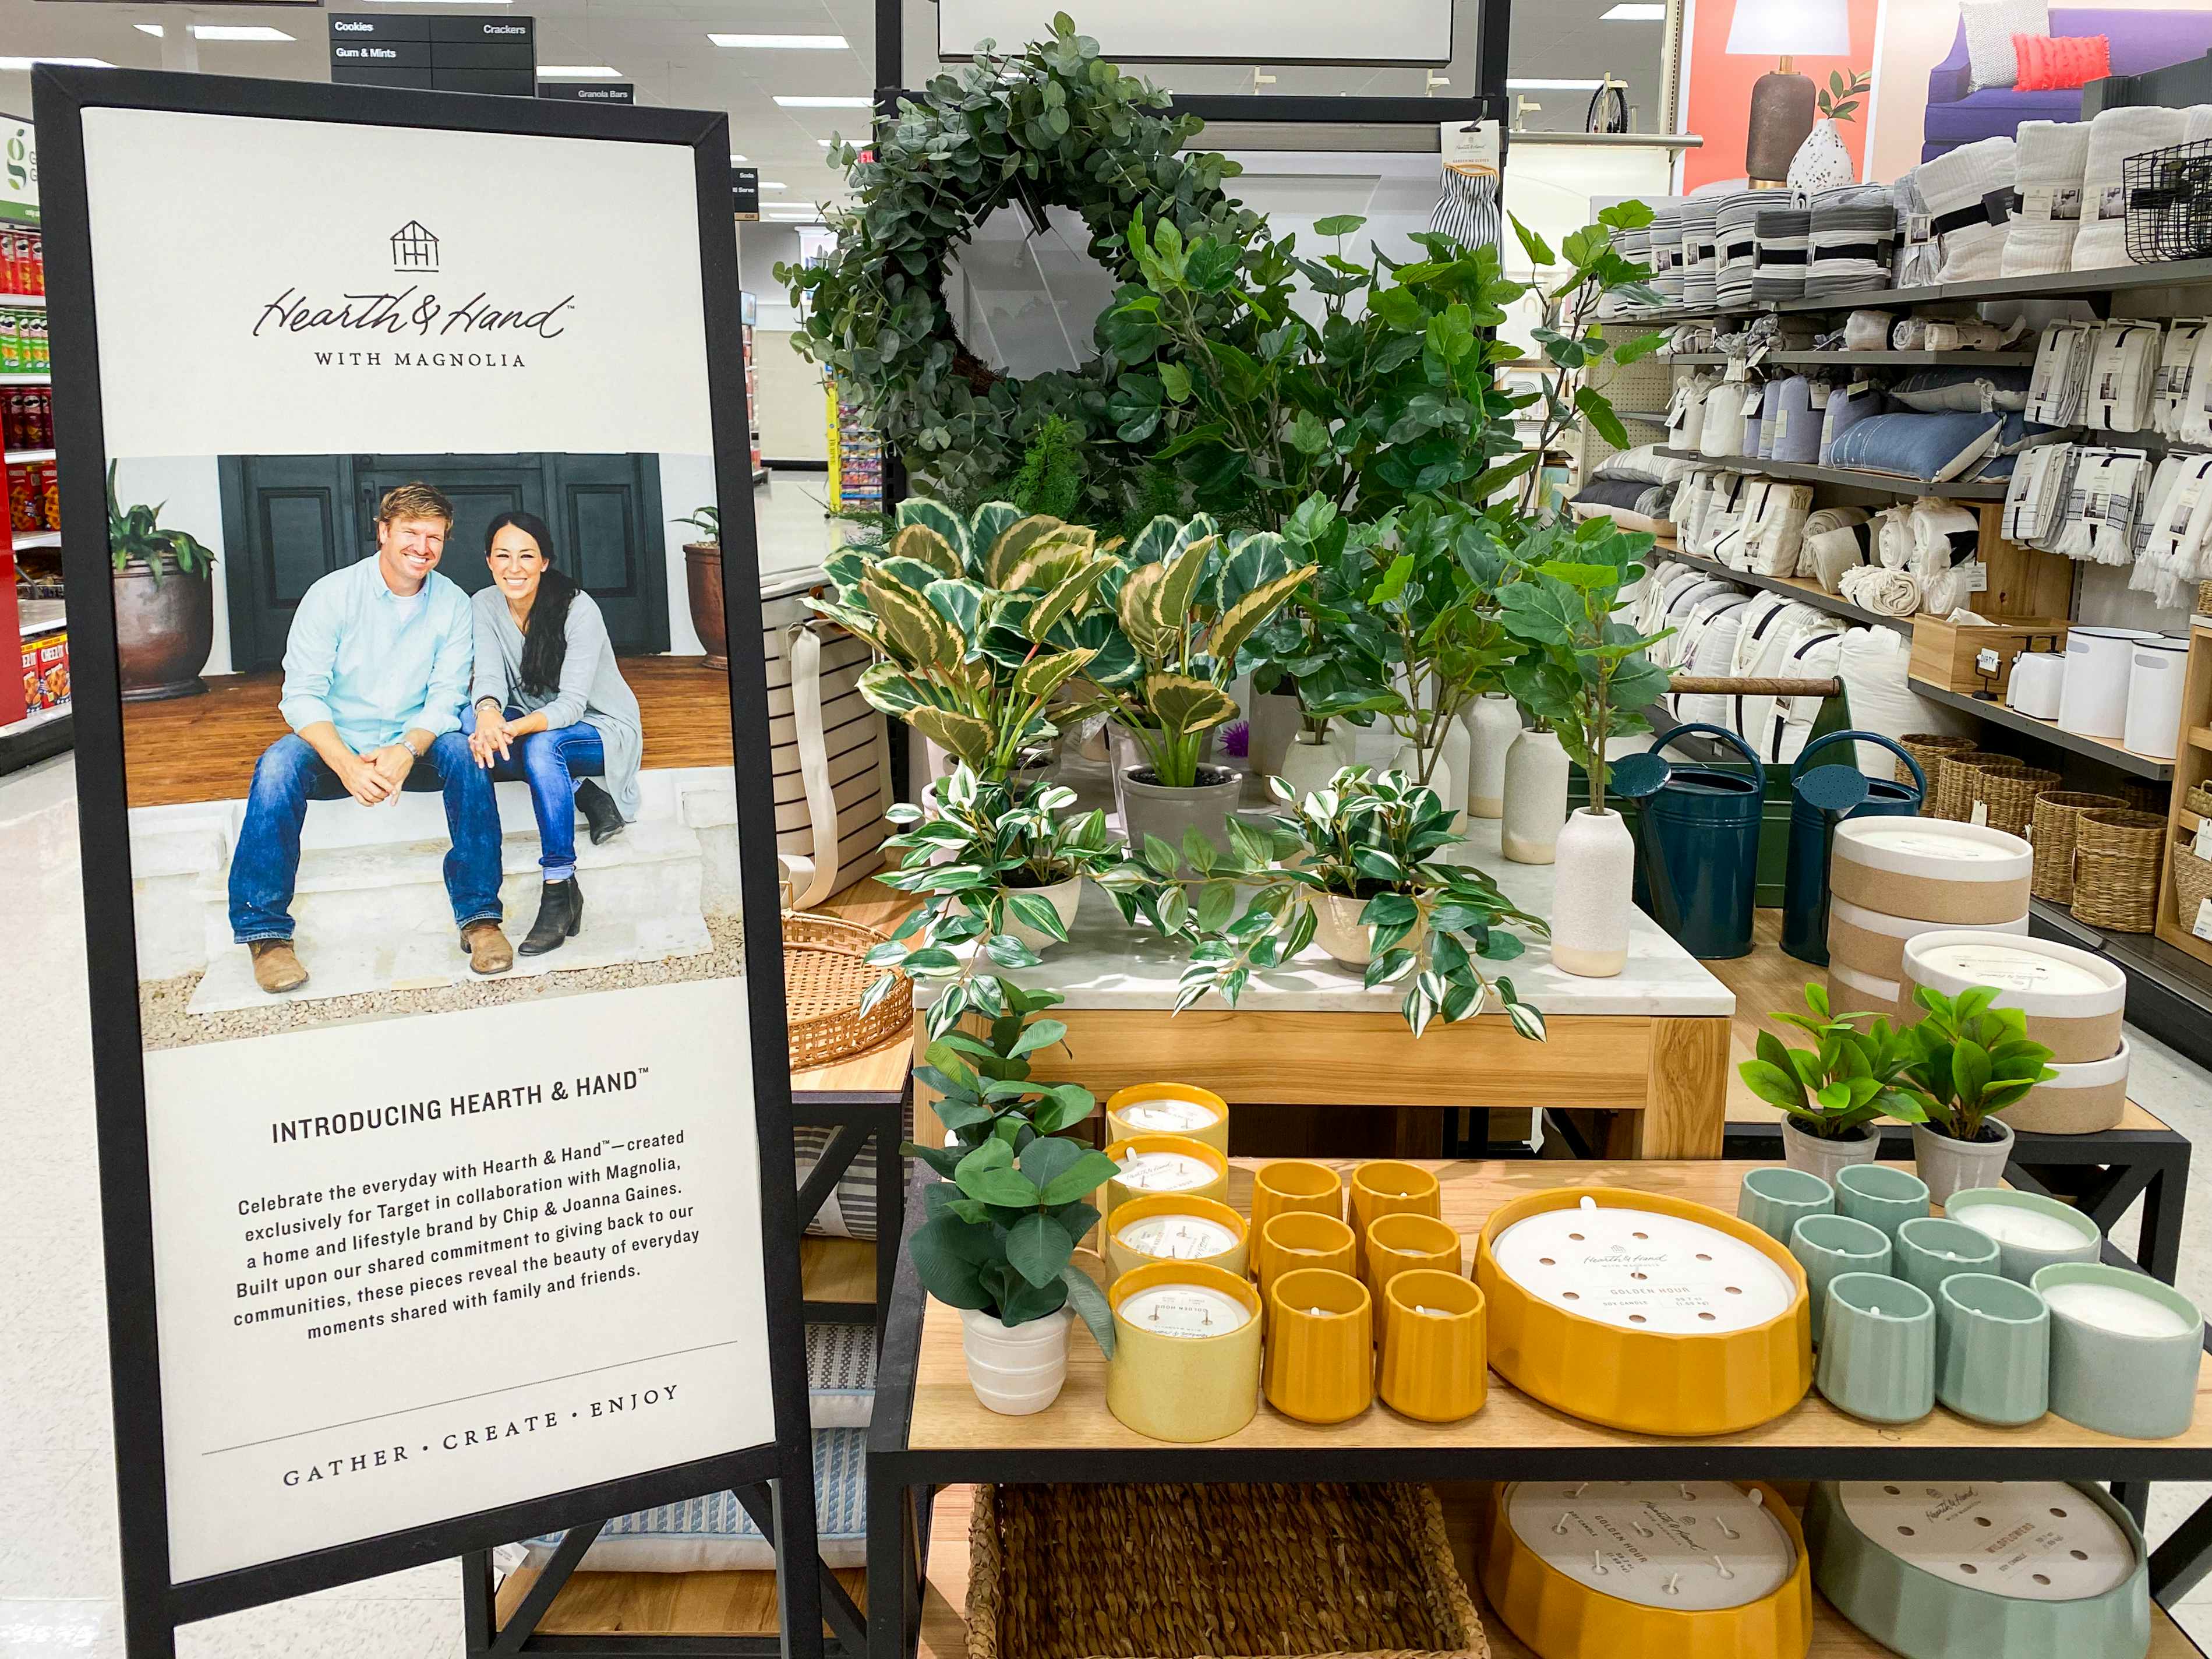 The Hearth & Hand with Magnolia display in the home decor section of Target.